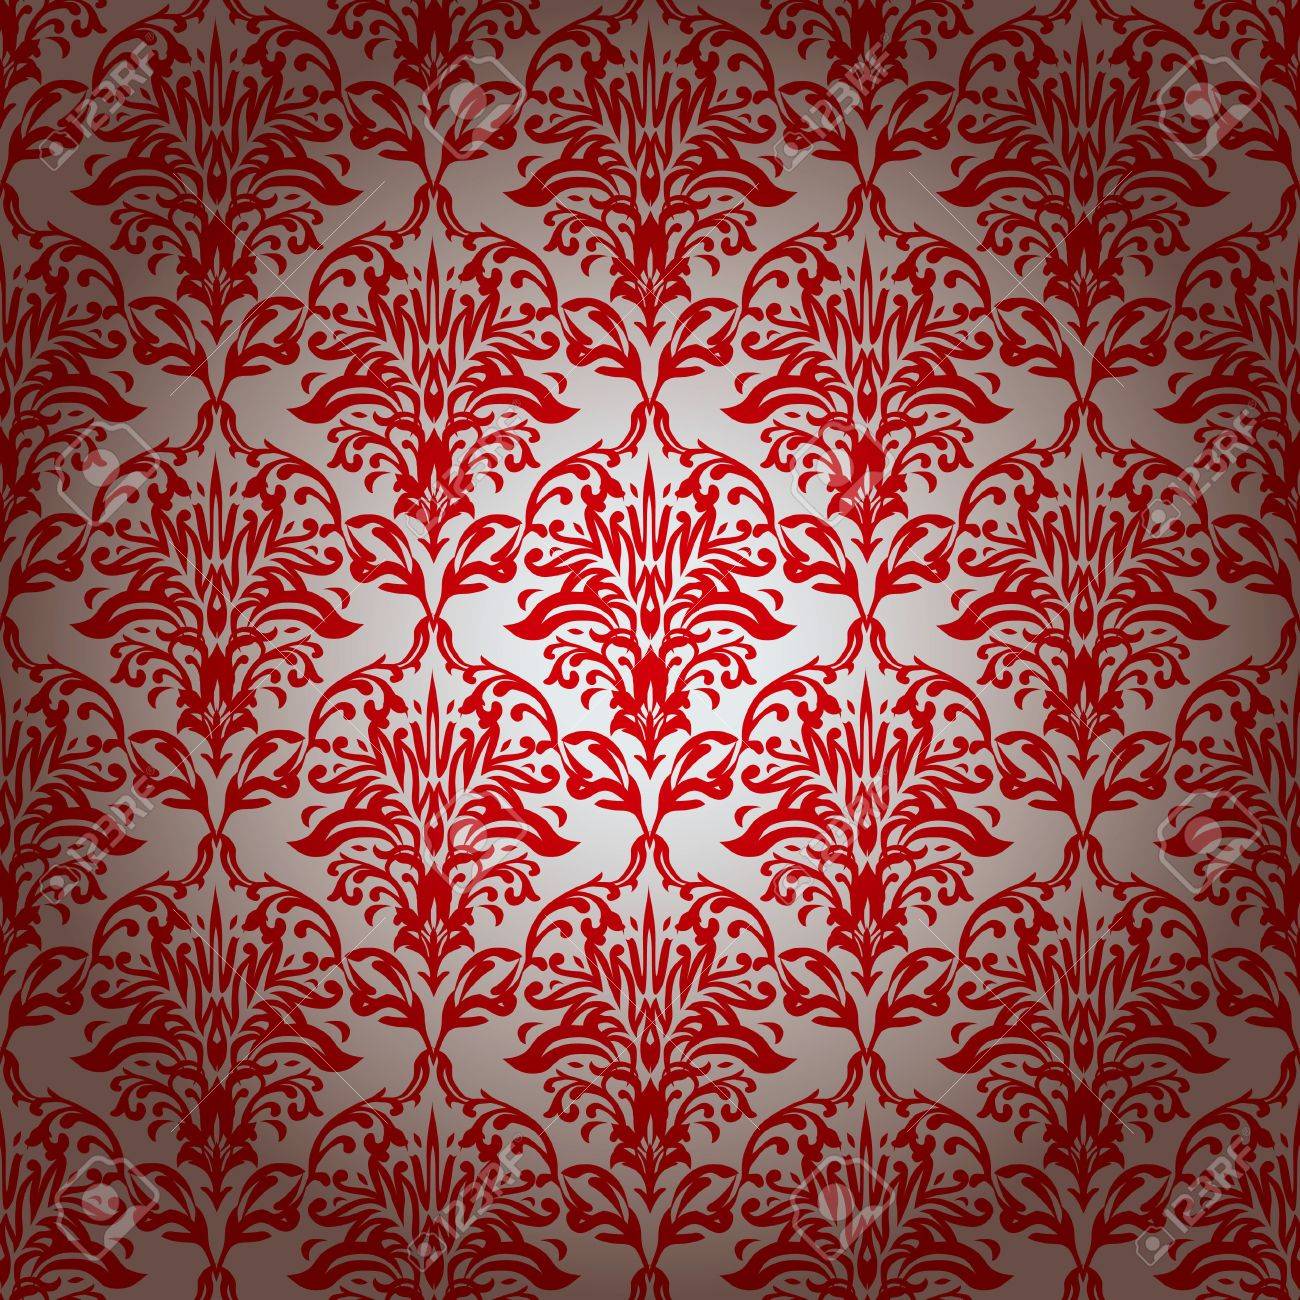 Red And Silver Repeating Wallpaper Design With Gradient Effect